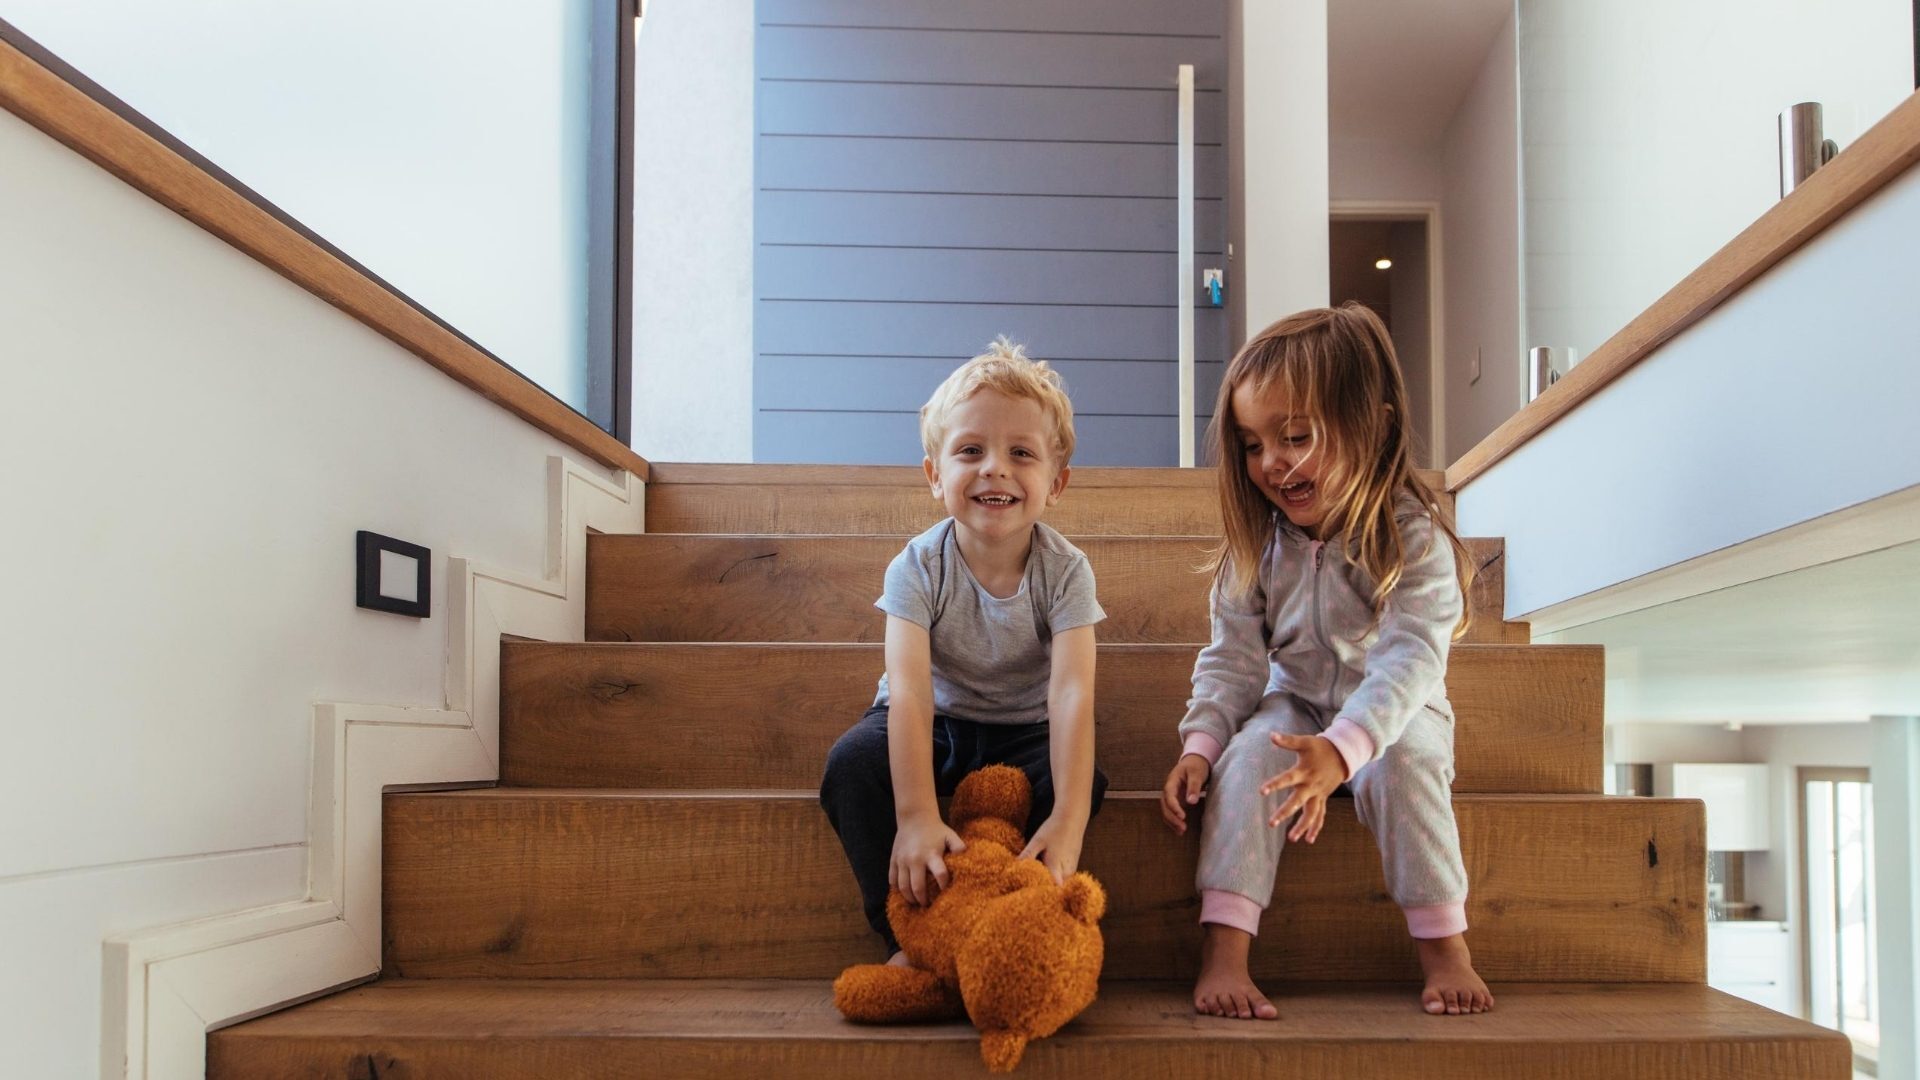 Children playing with a brown teddy bear on the stairs at home